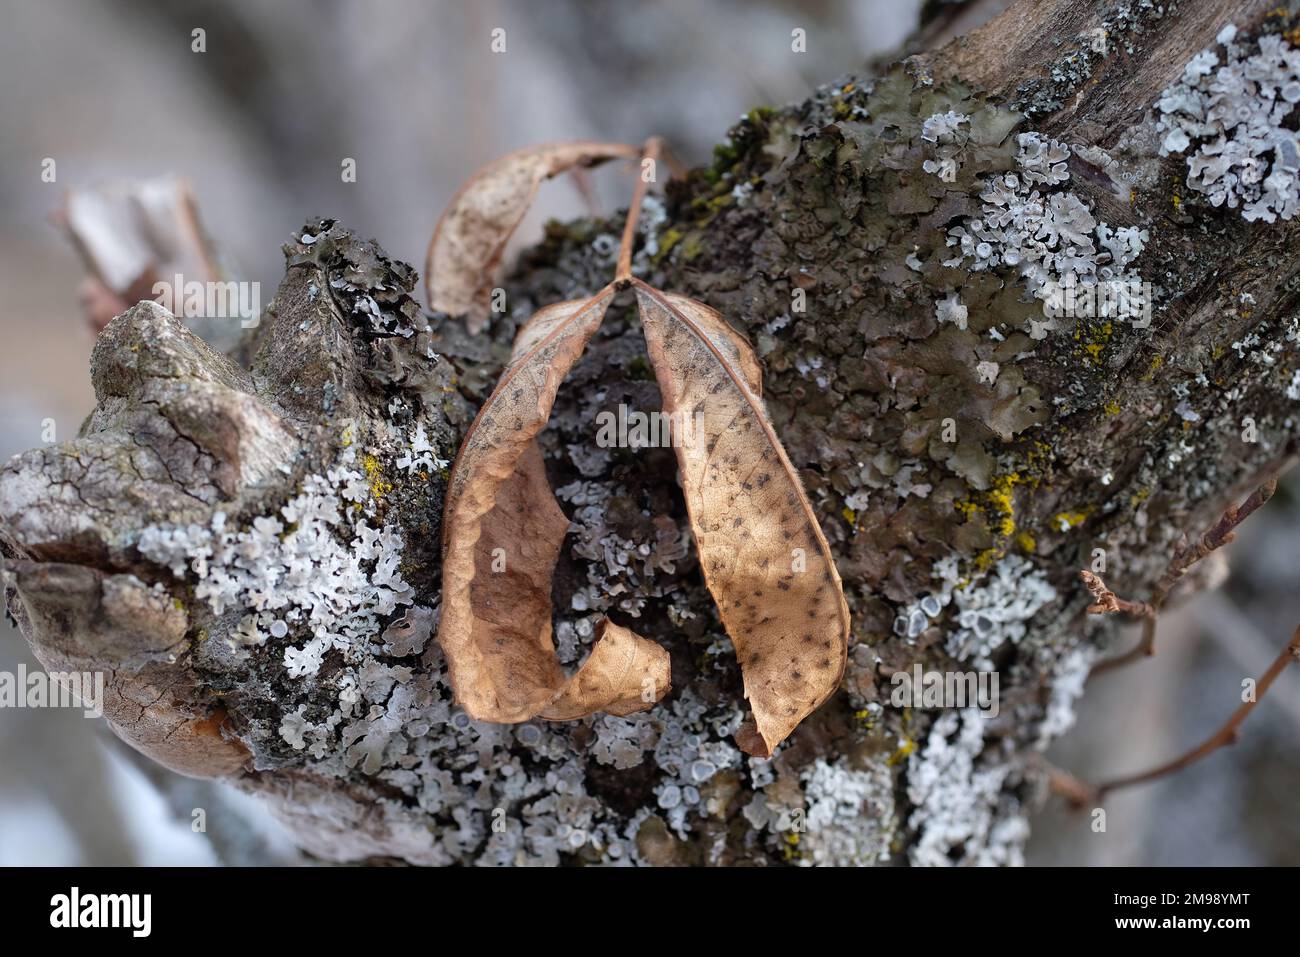 The leaf of on a wild pear branch covered with lichen. Stock Photo